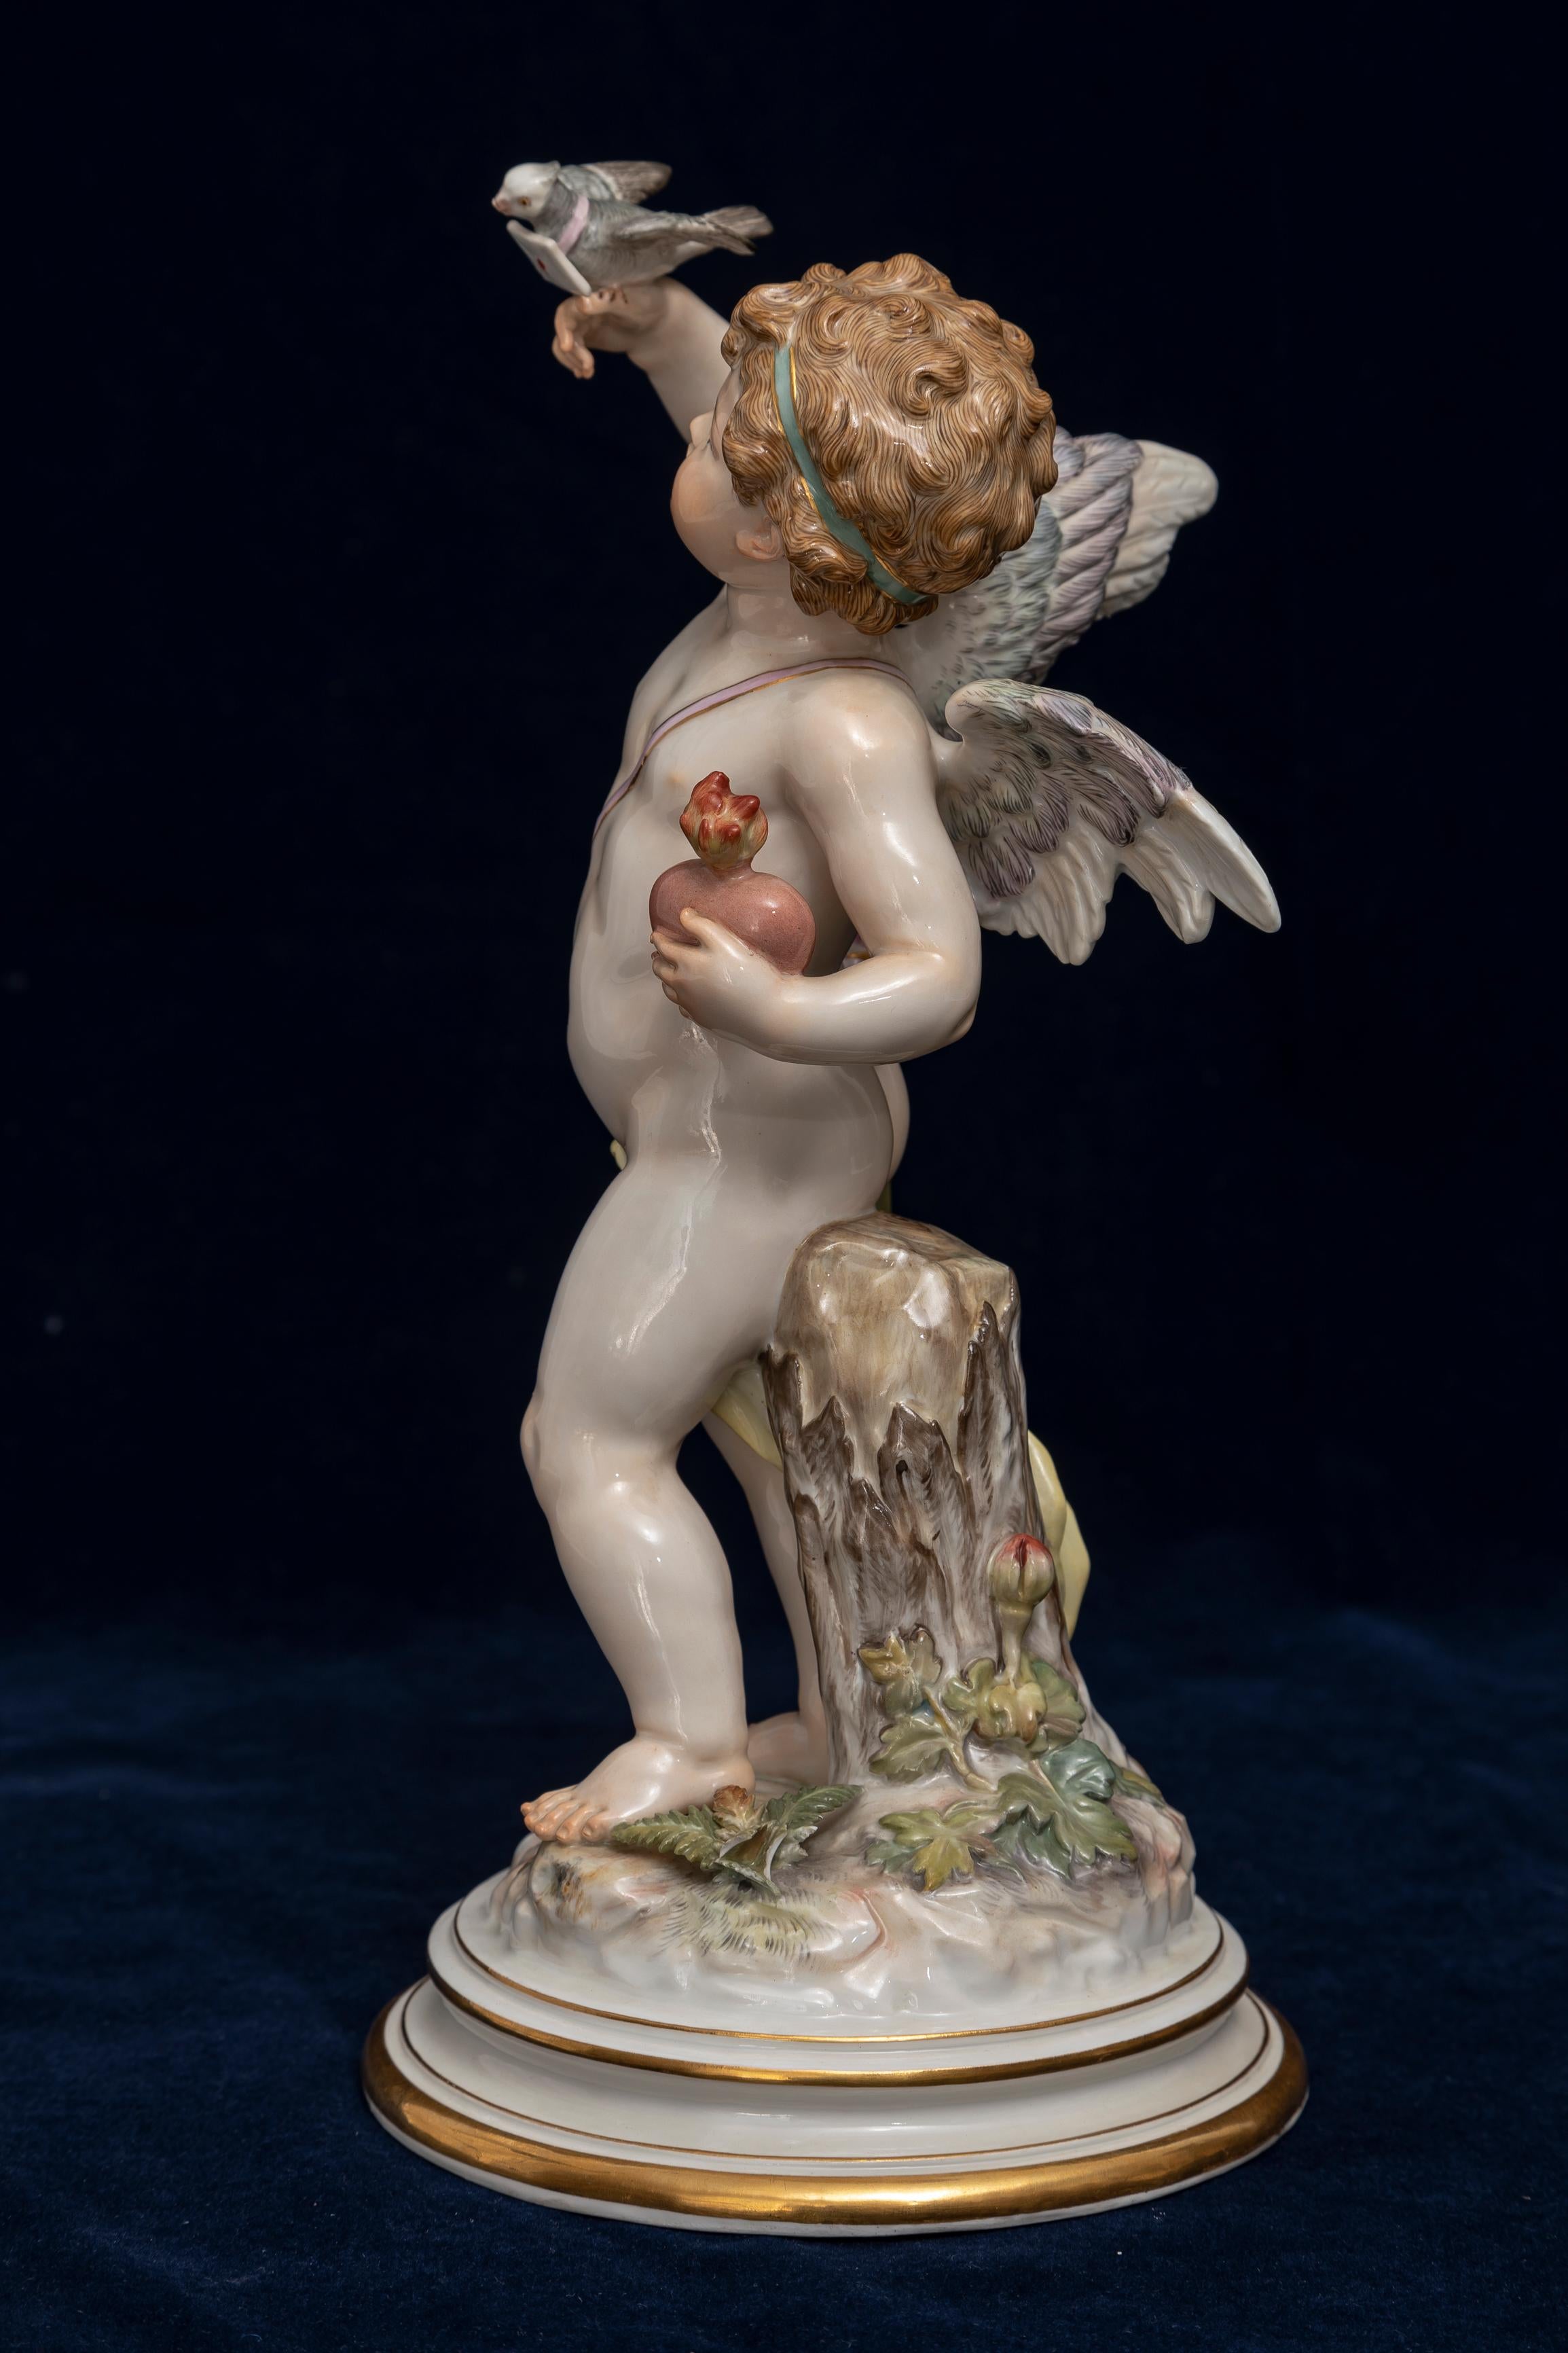 Meissen Porcelain, Love Series: Cupid Mailing a Love Letter with Love Bird C1870, SUPREME

A Meissen porcelain figure from the Love Series: Cupid Mailing a Love Letter with a Love Bird. Circa 1870, this piece epitomizes the finest quality in terms